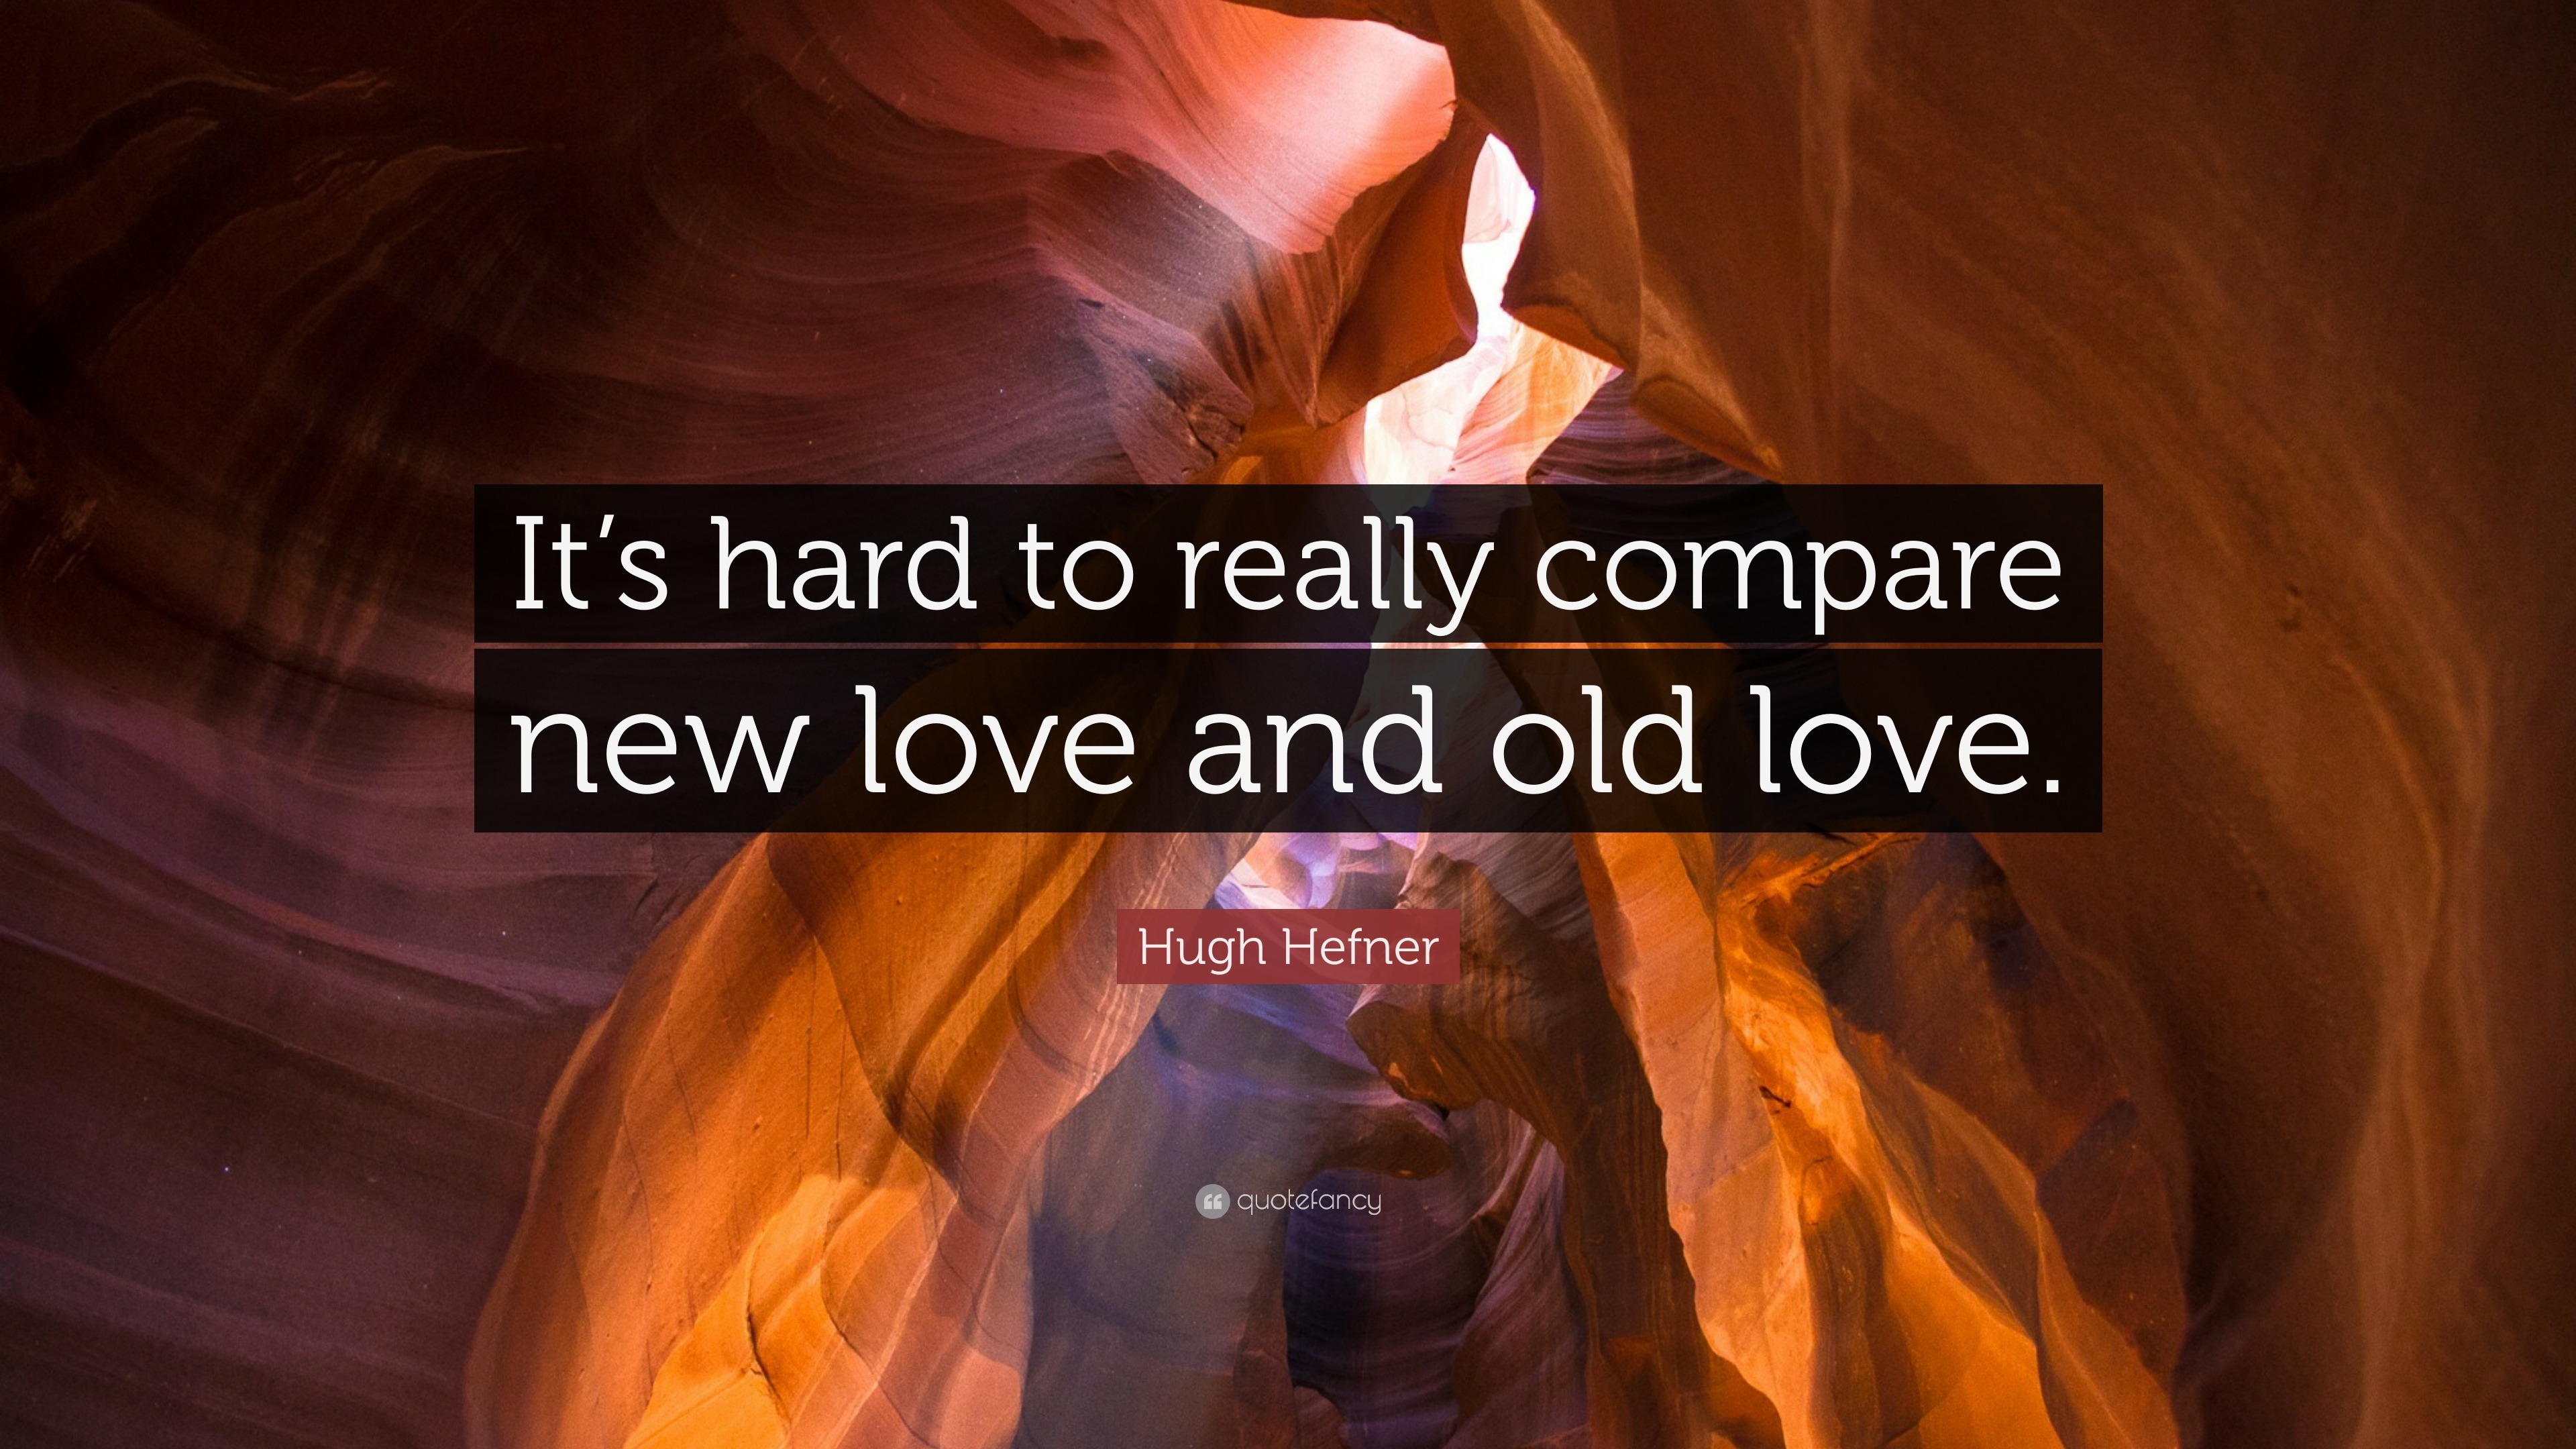 Hugh Hefner Quote: “It’s hard to really compare new love and old love.”